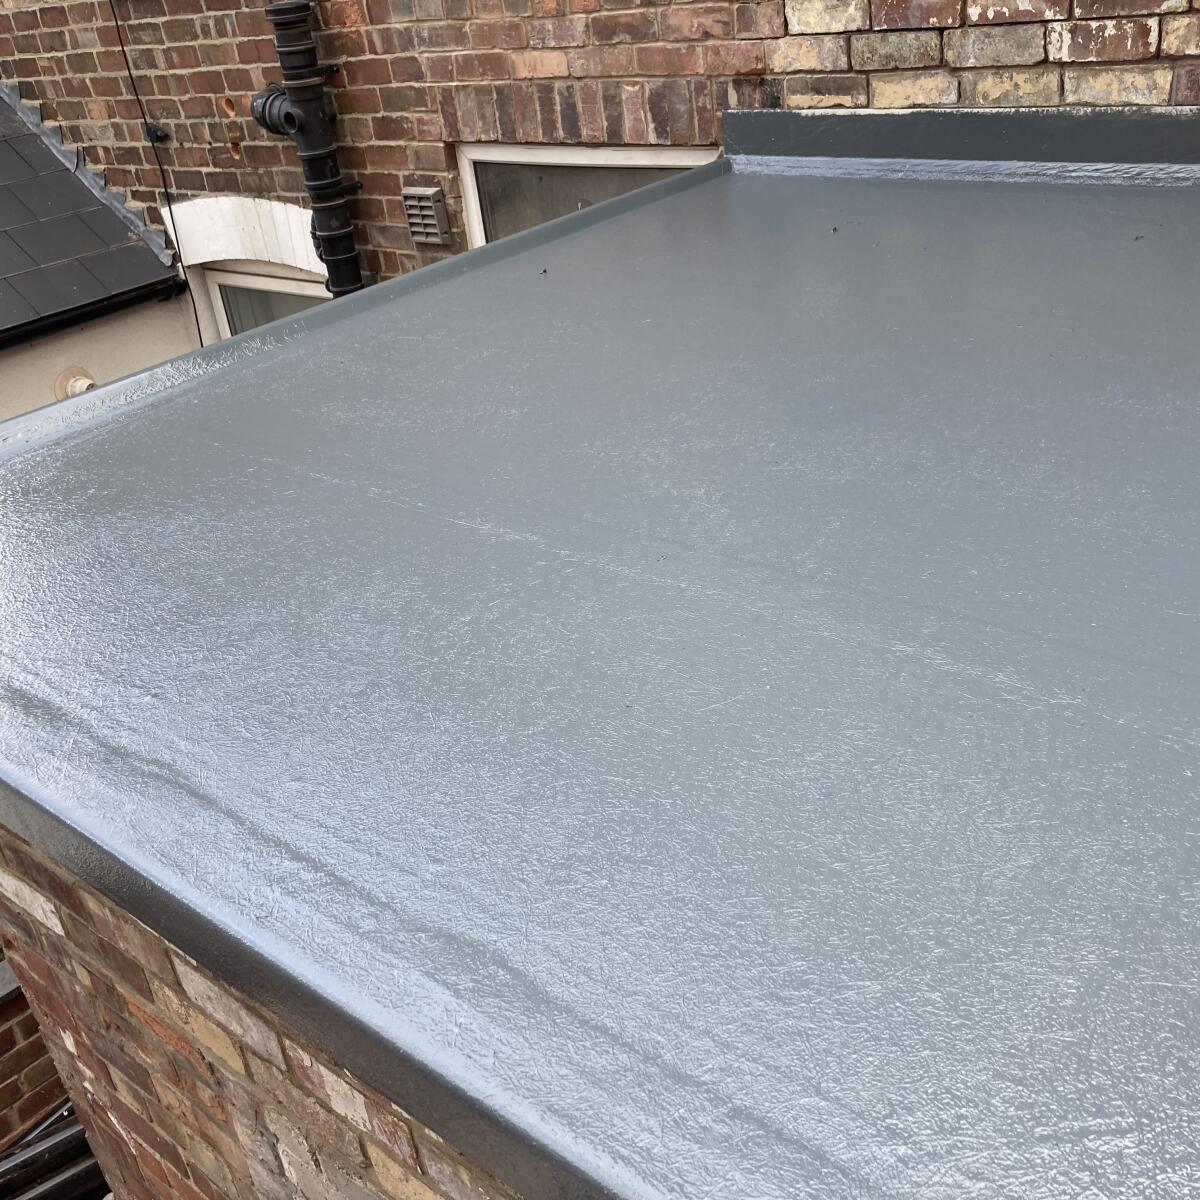 Composite Roof Supplies Ltd 5 star review on 9th June 2022